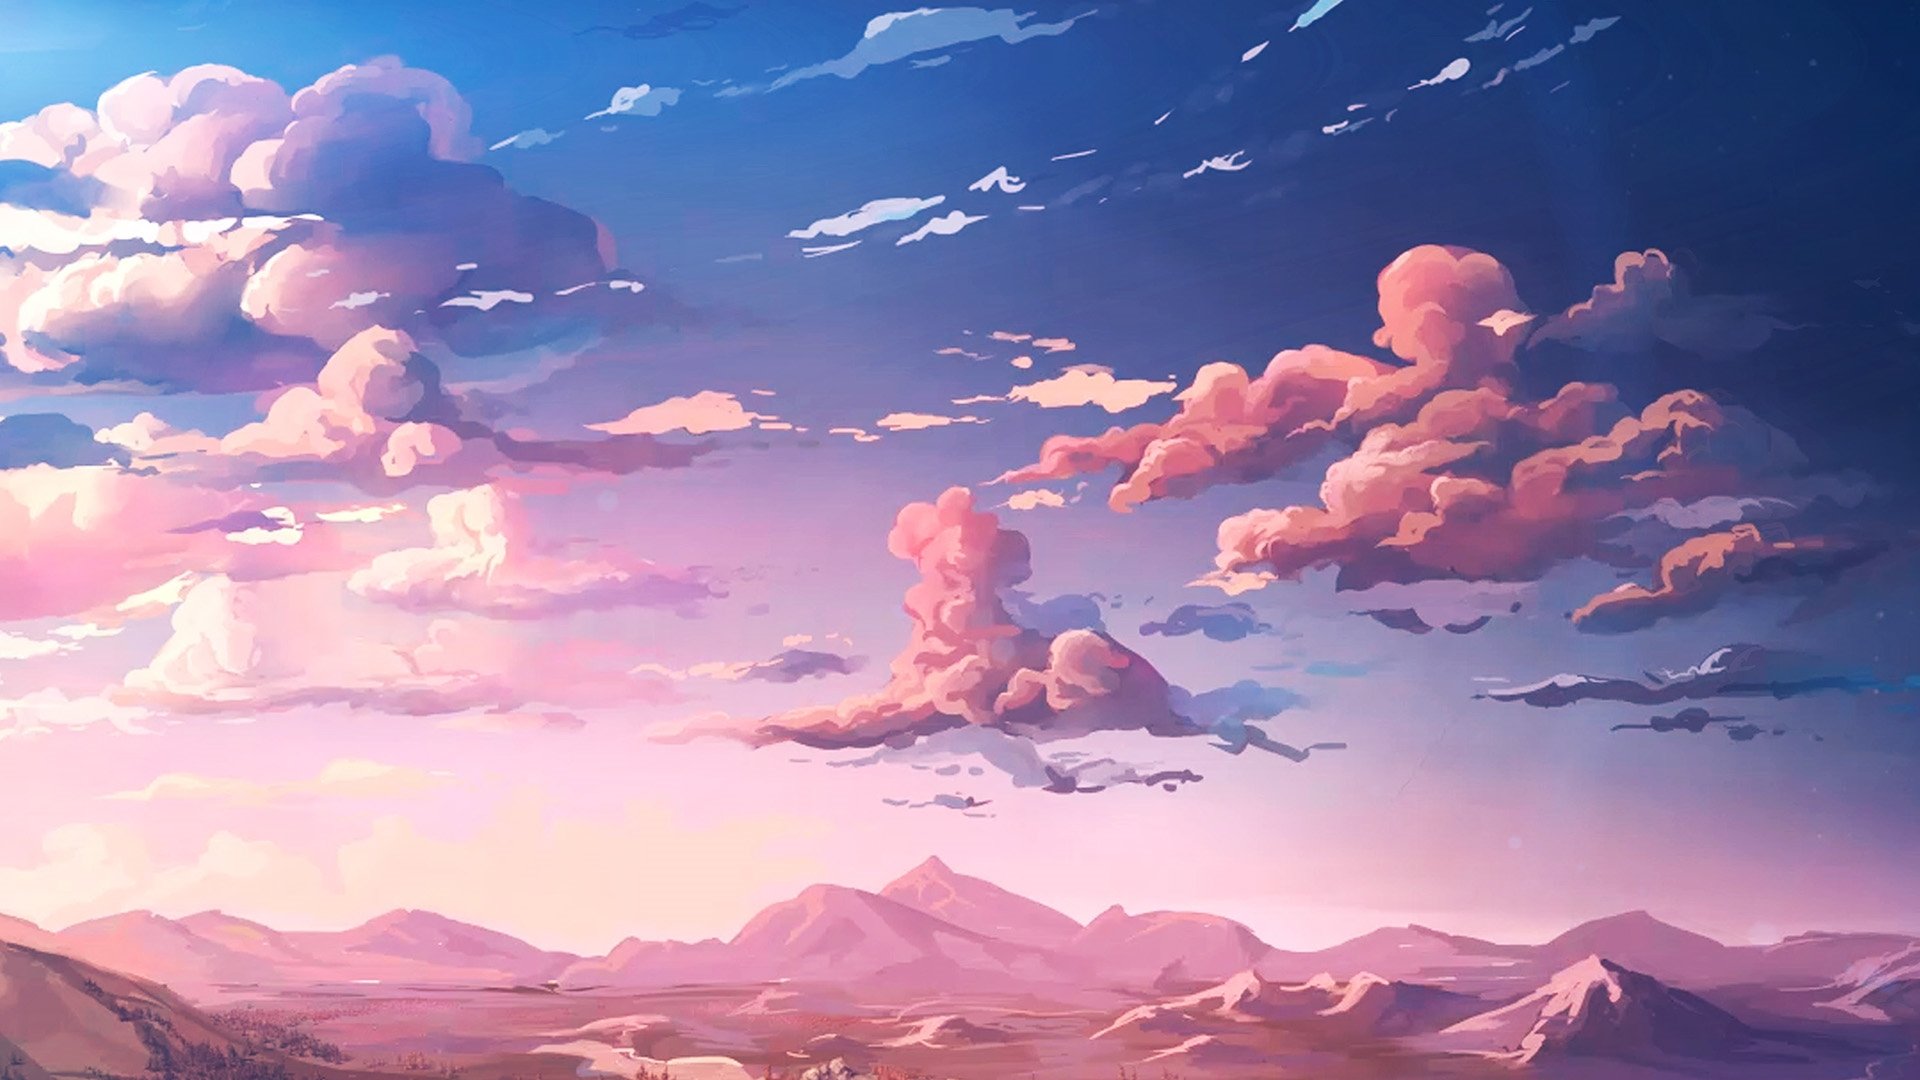 11,132 Anime Sky Background Images, Stock Photos & Vectors | Shutterstock